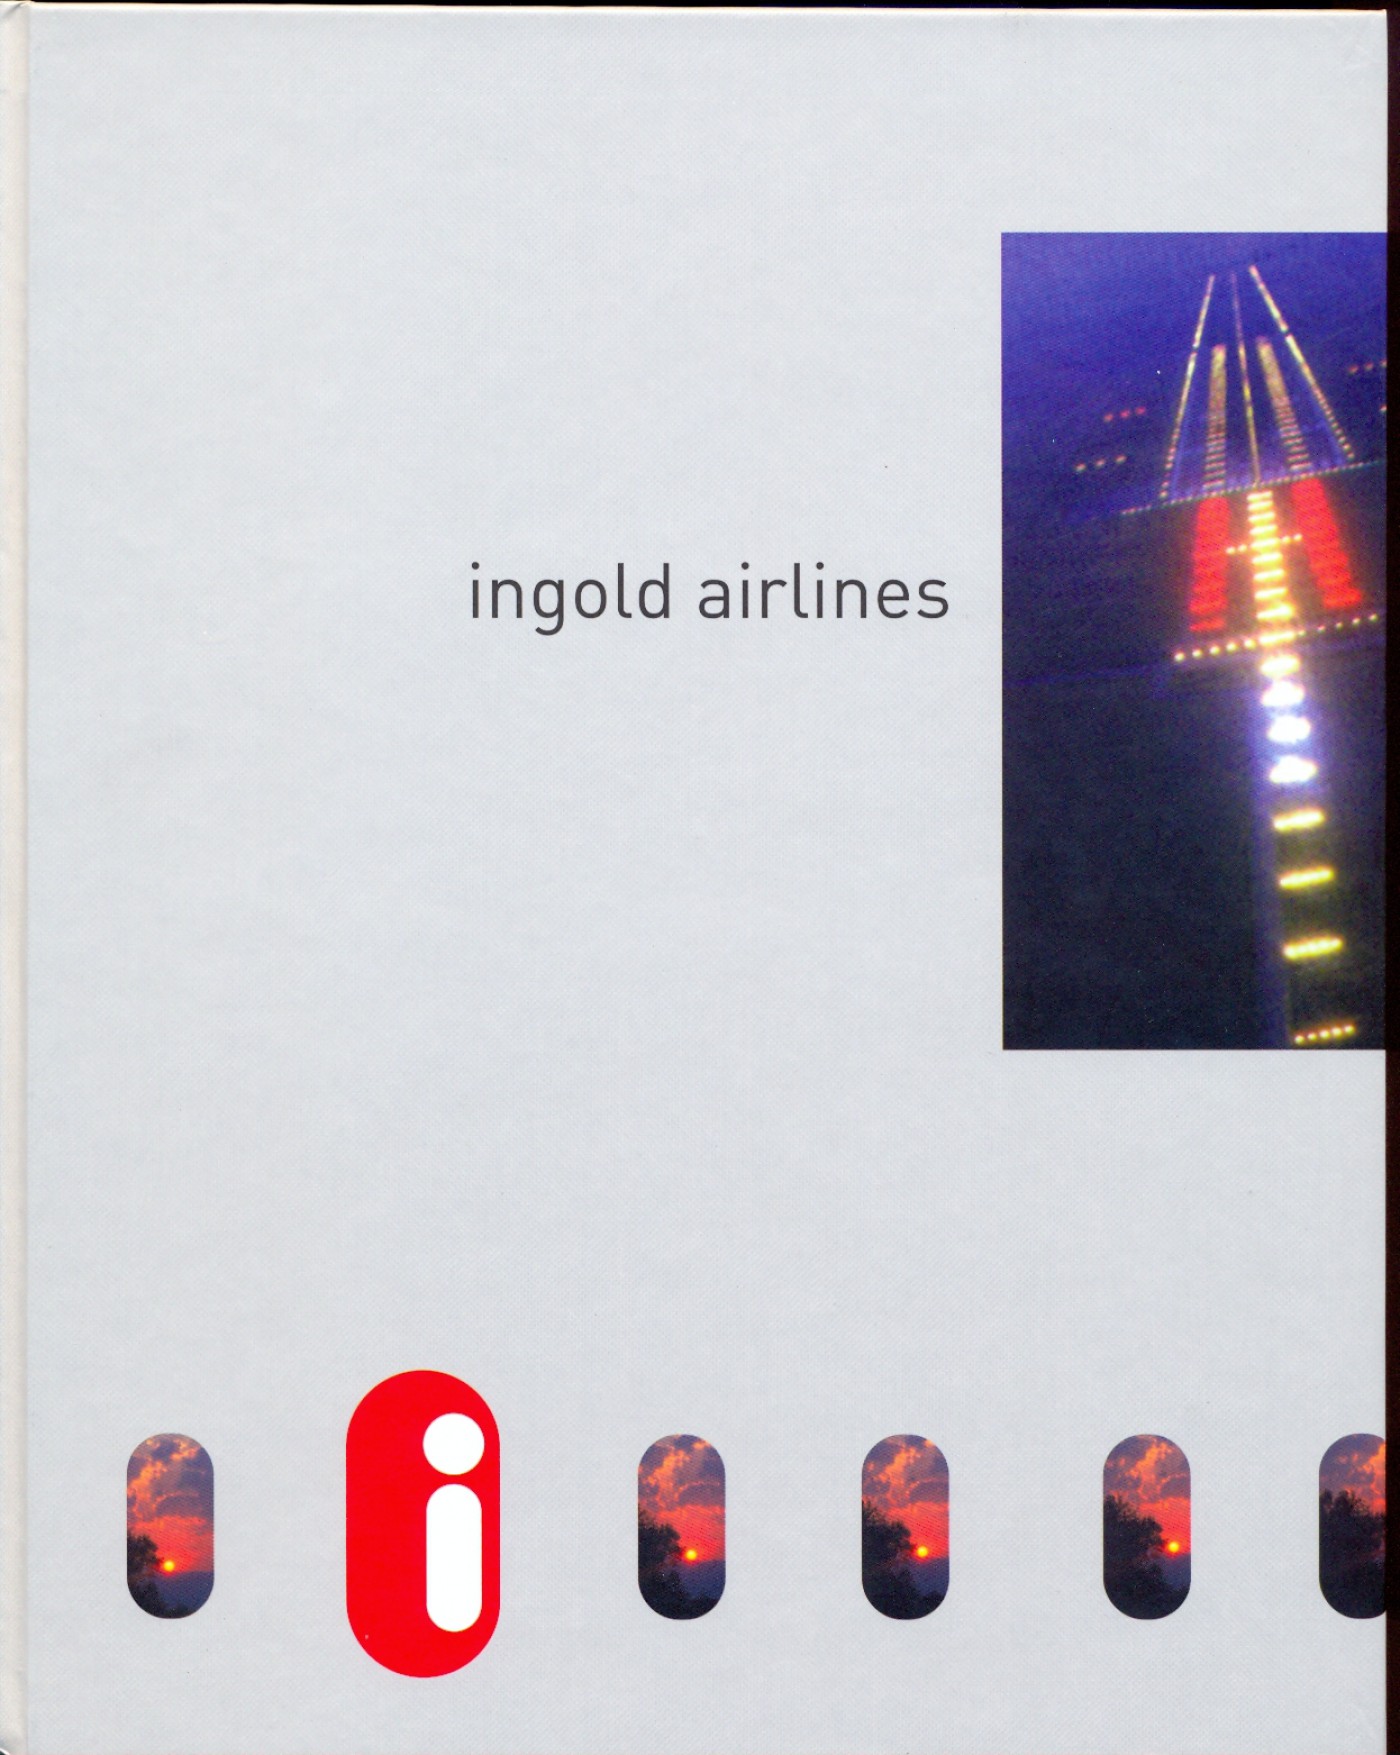 ingold airlines - more than miles